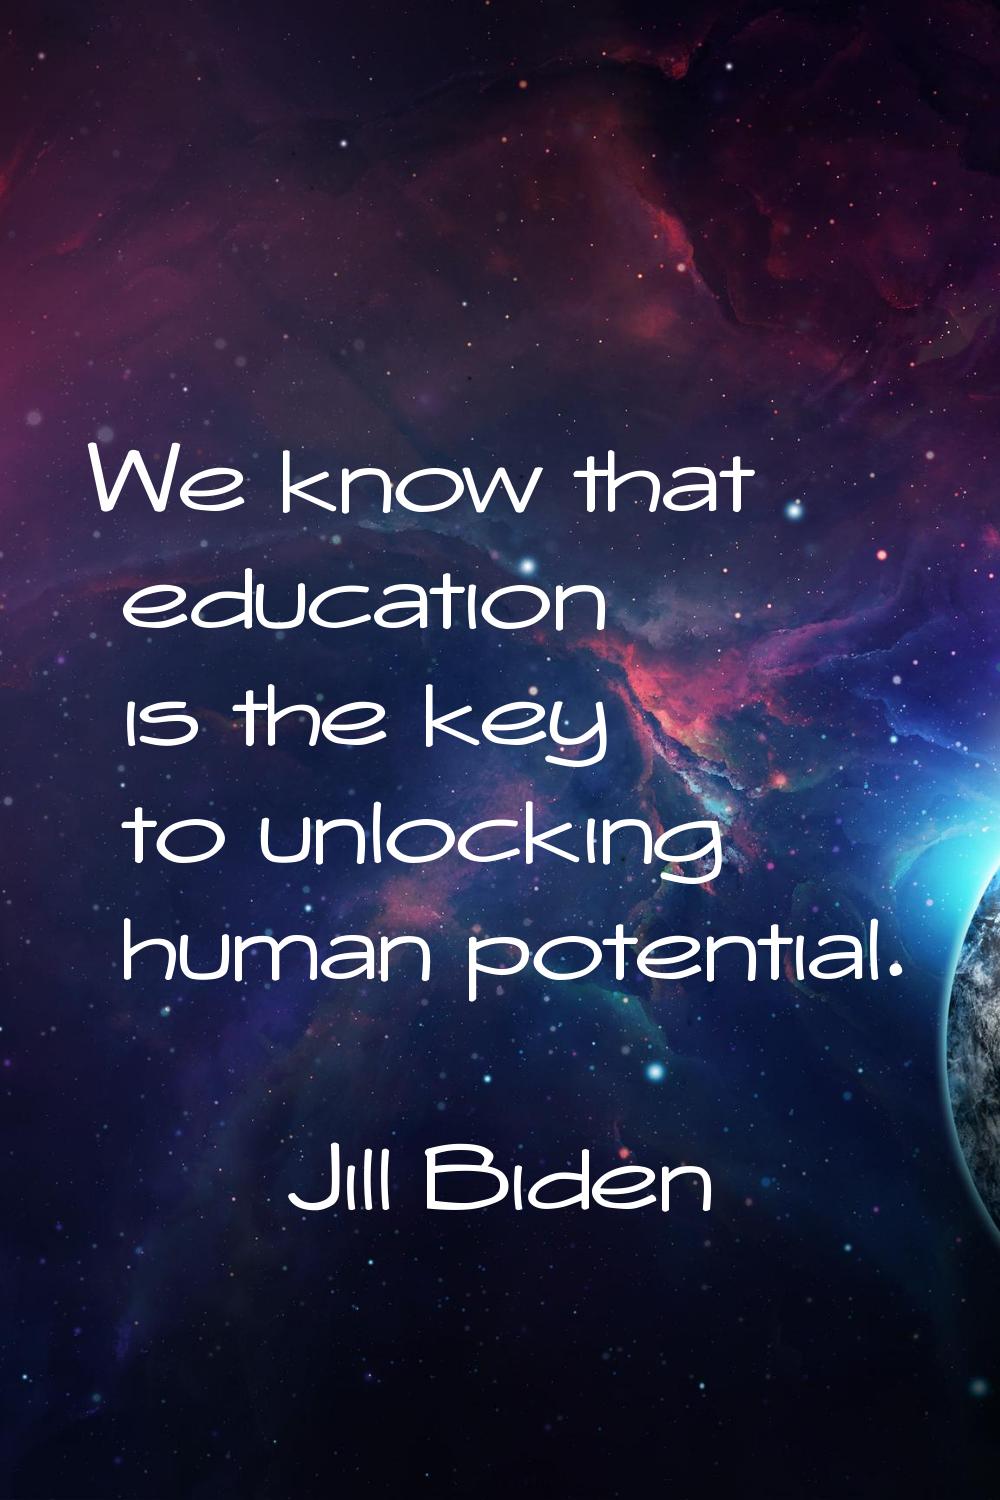 We know that education is the key to unlocking human potential.